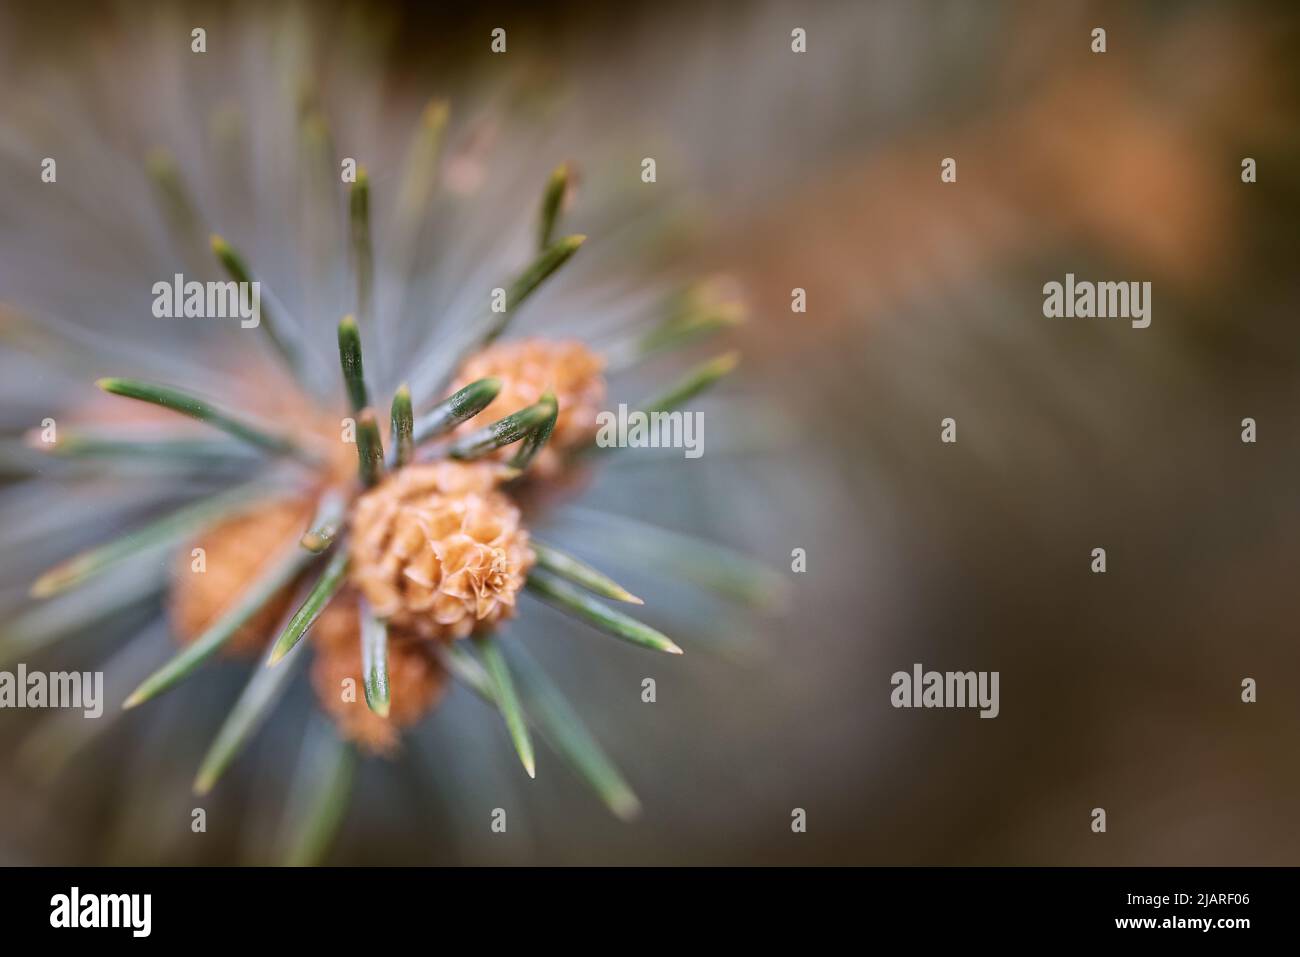 selective focus of needles and pine flowers Stock Photo